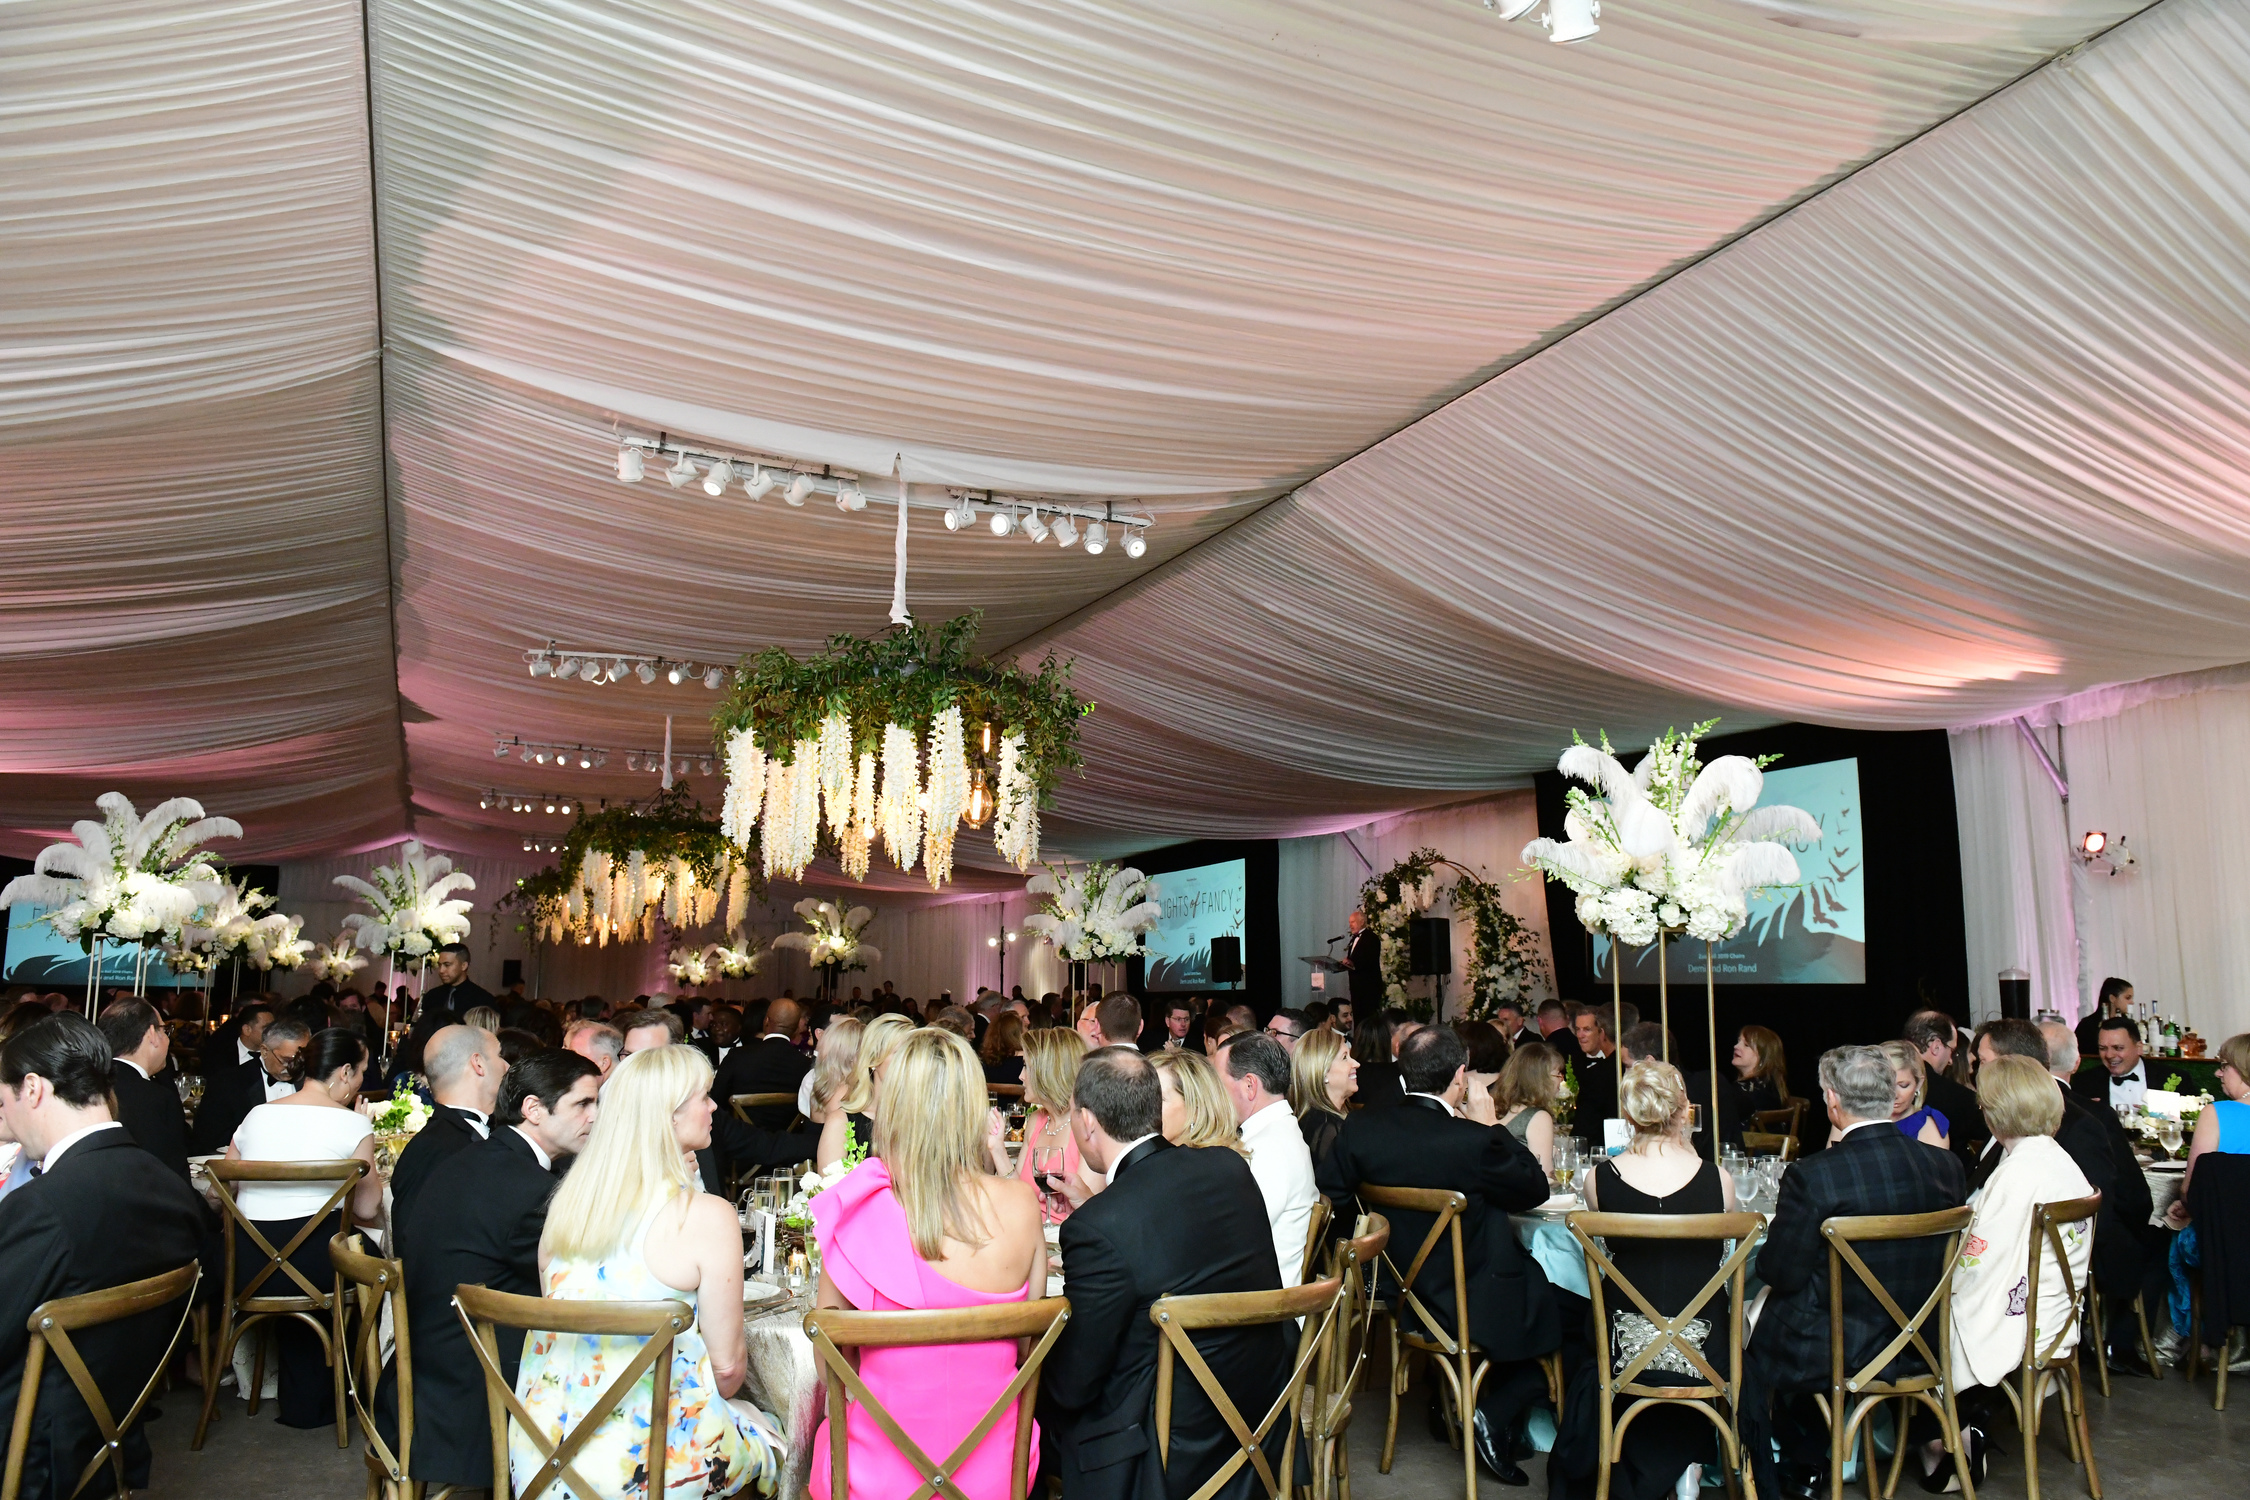 Houstonians Flock to Raise Funds at Annual Zoo Ball The Houston Zoo